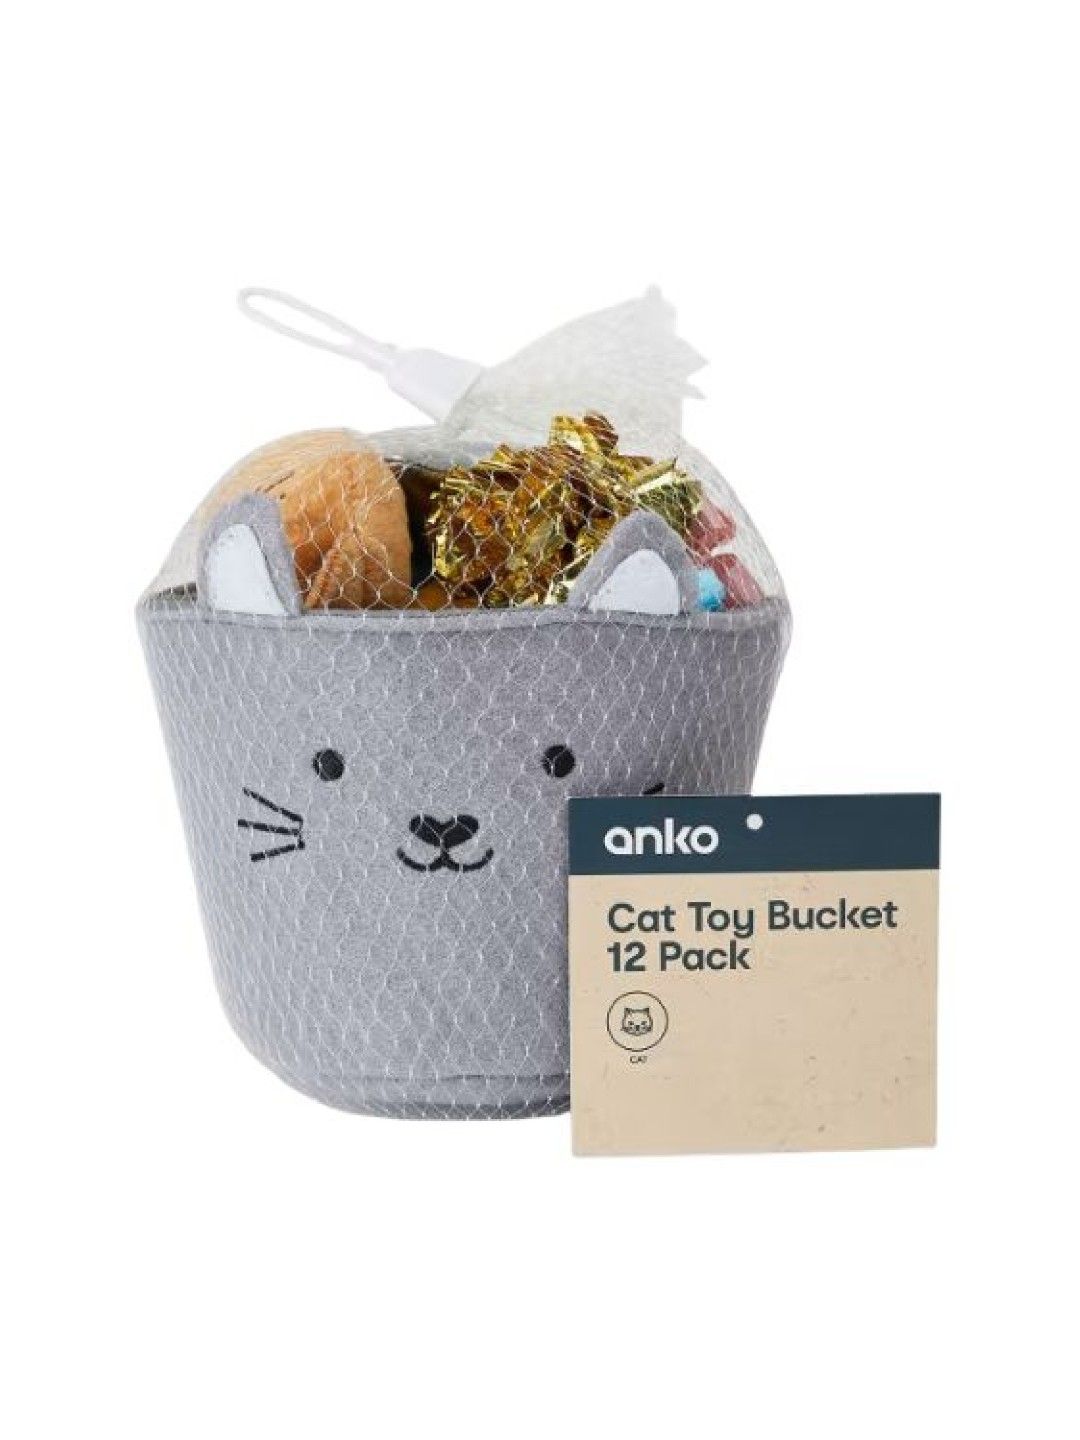 Anko Cat Toy Basket 12 Pack (Assorted- Image 3)